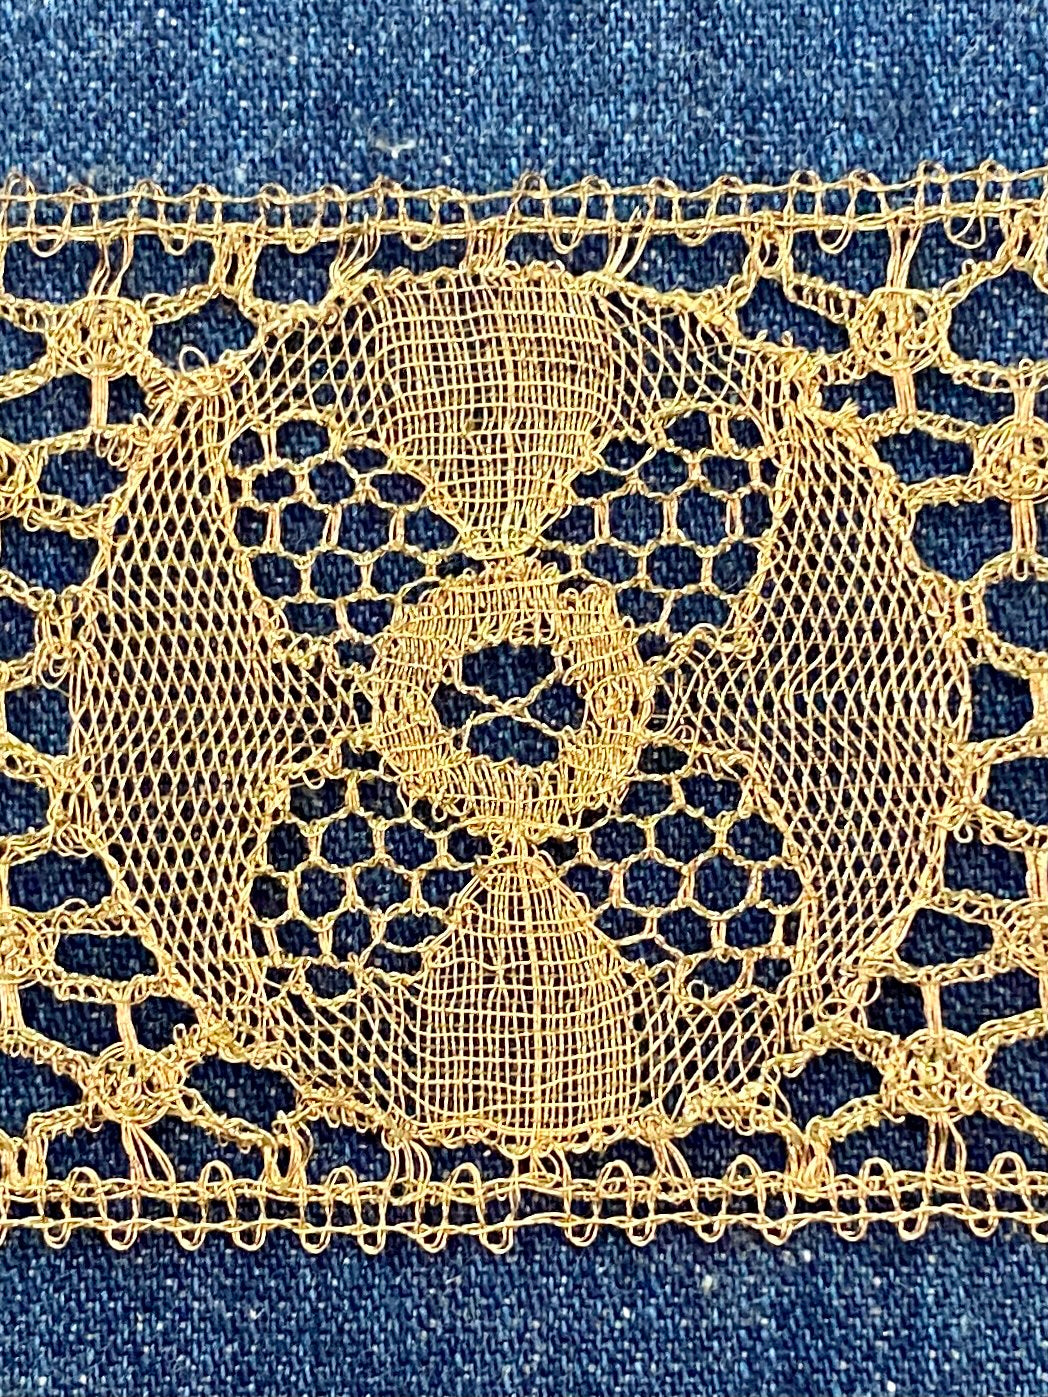 Antique French Gold Bullion Lace Trim, 68 Yards, New Old Stock